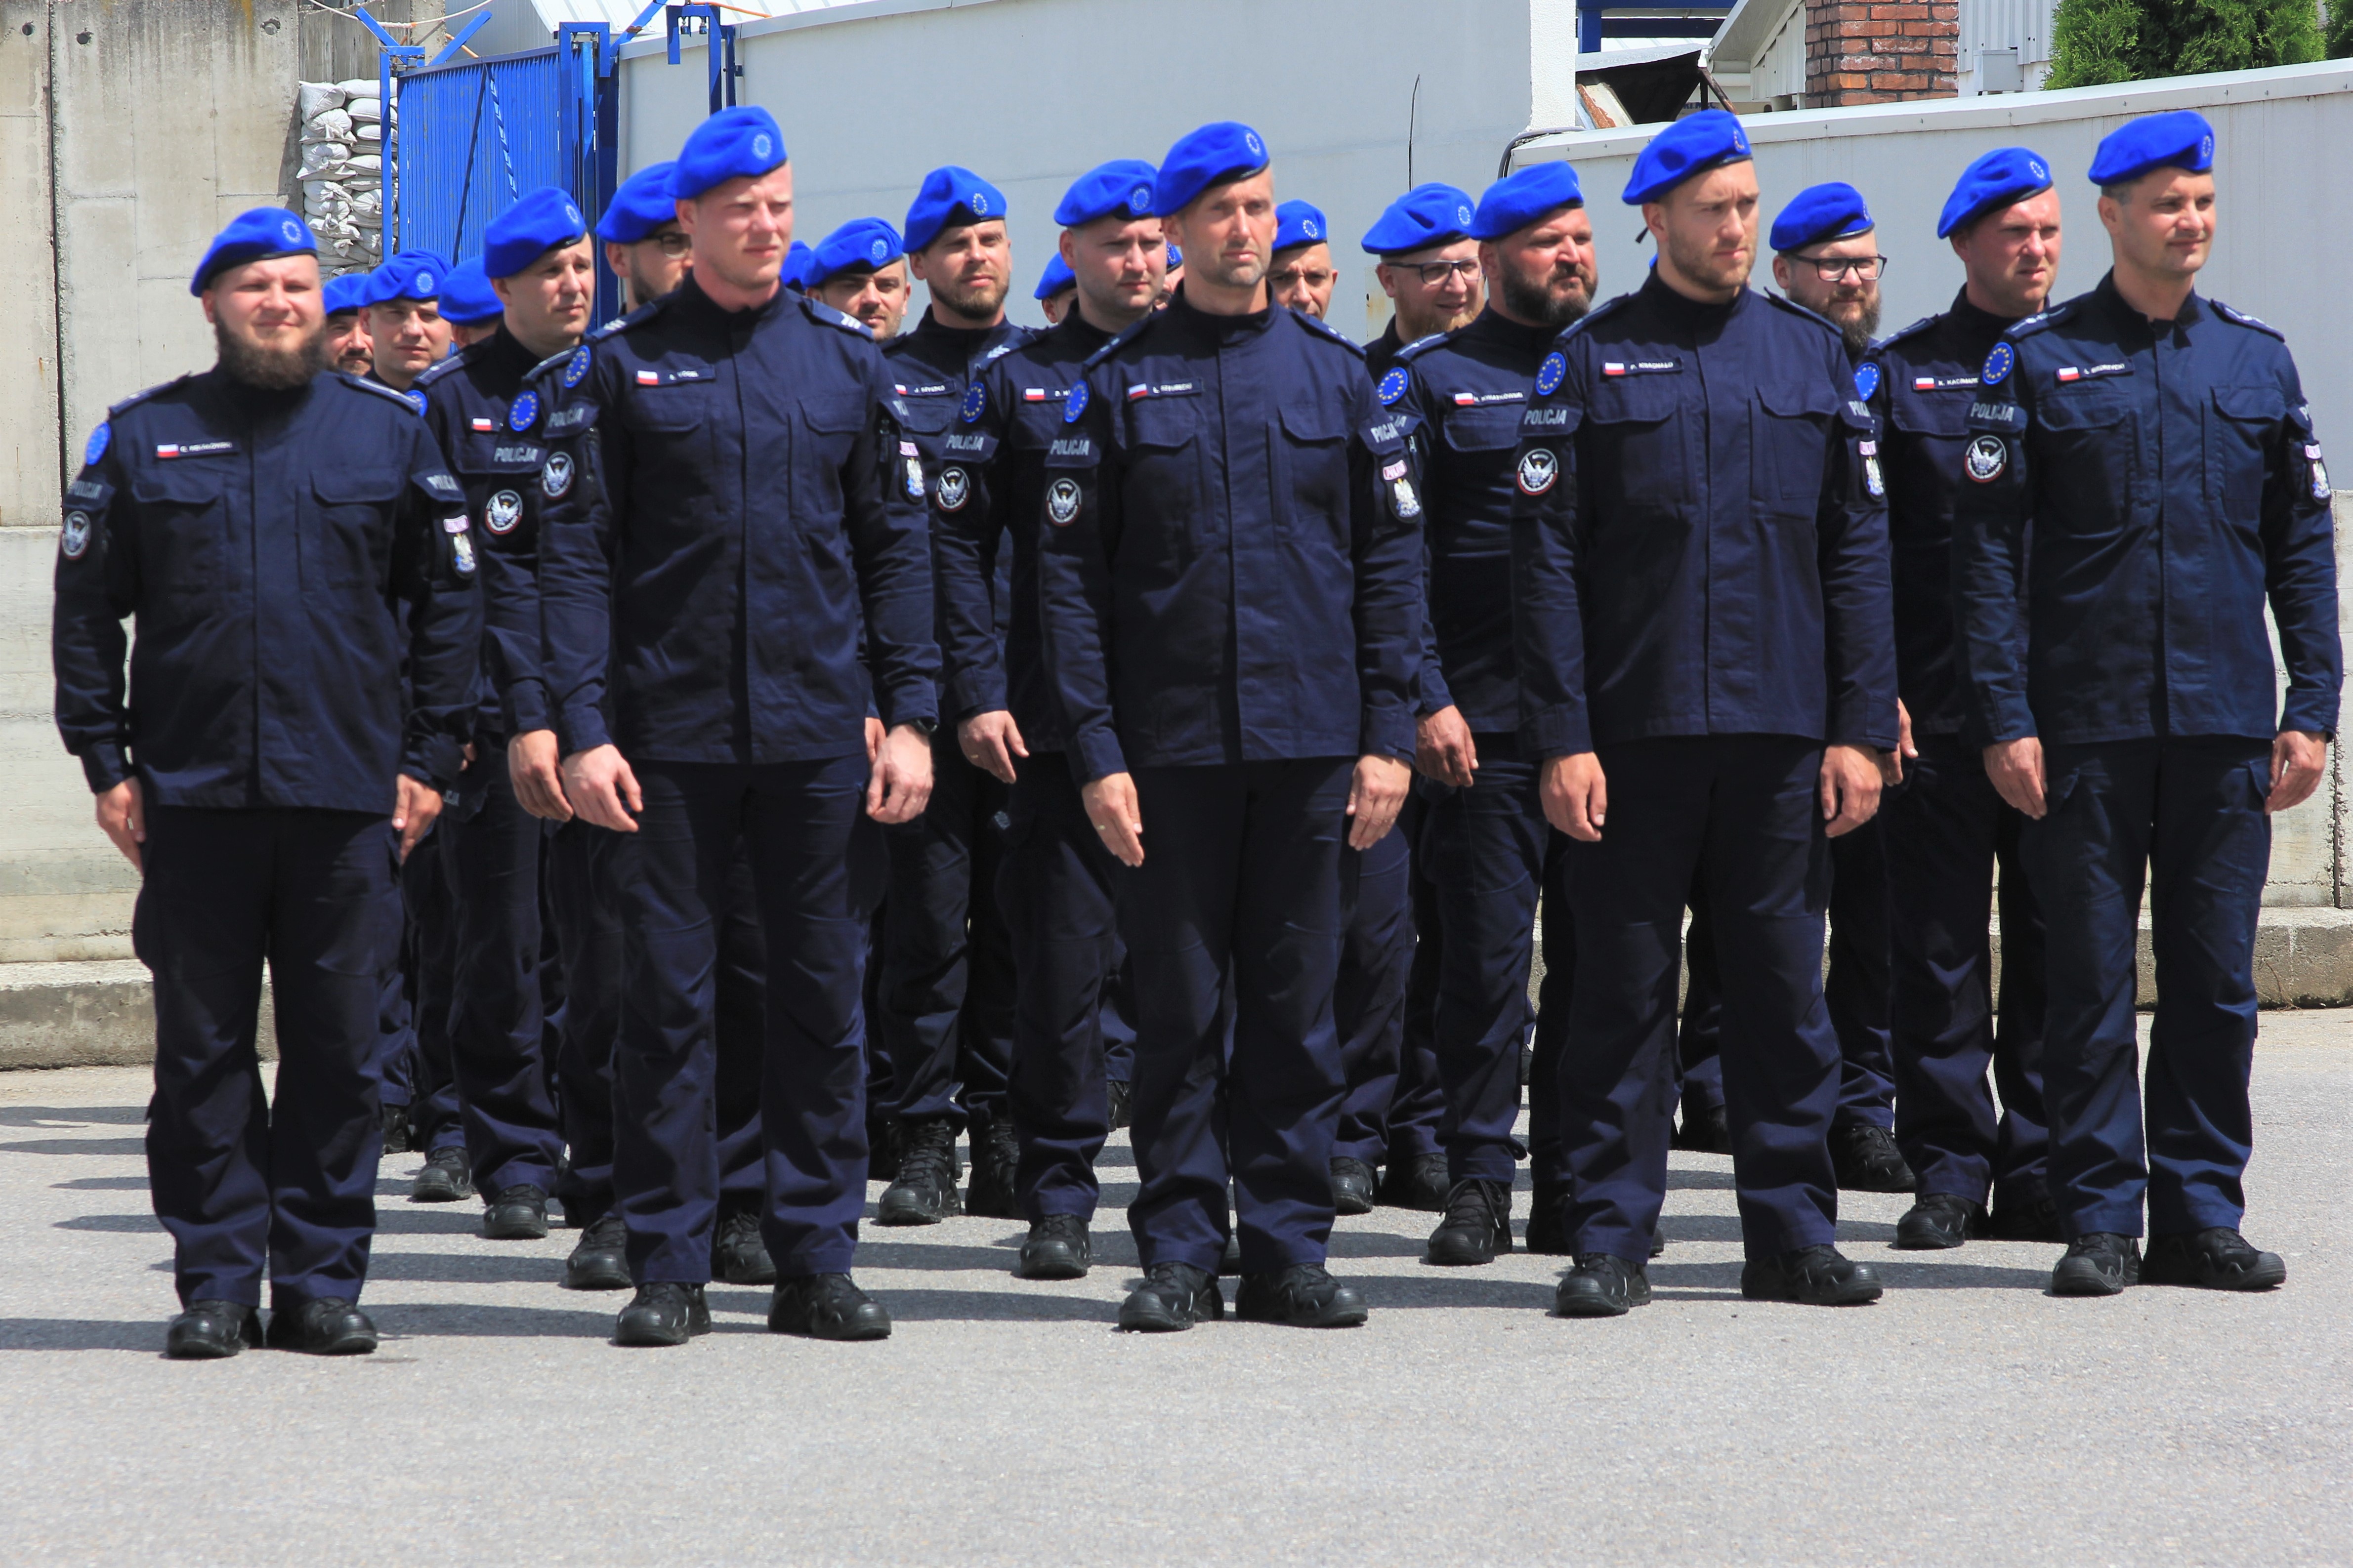 Members of EULEX’s Formed Police Unit Awarded with the CSDP Service Medal 